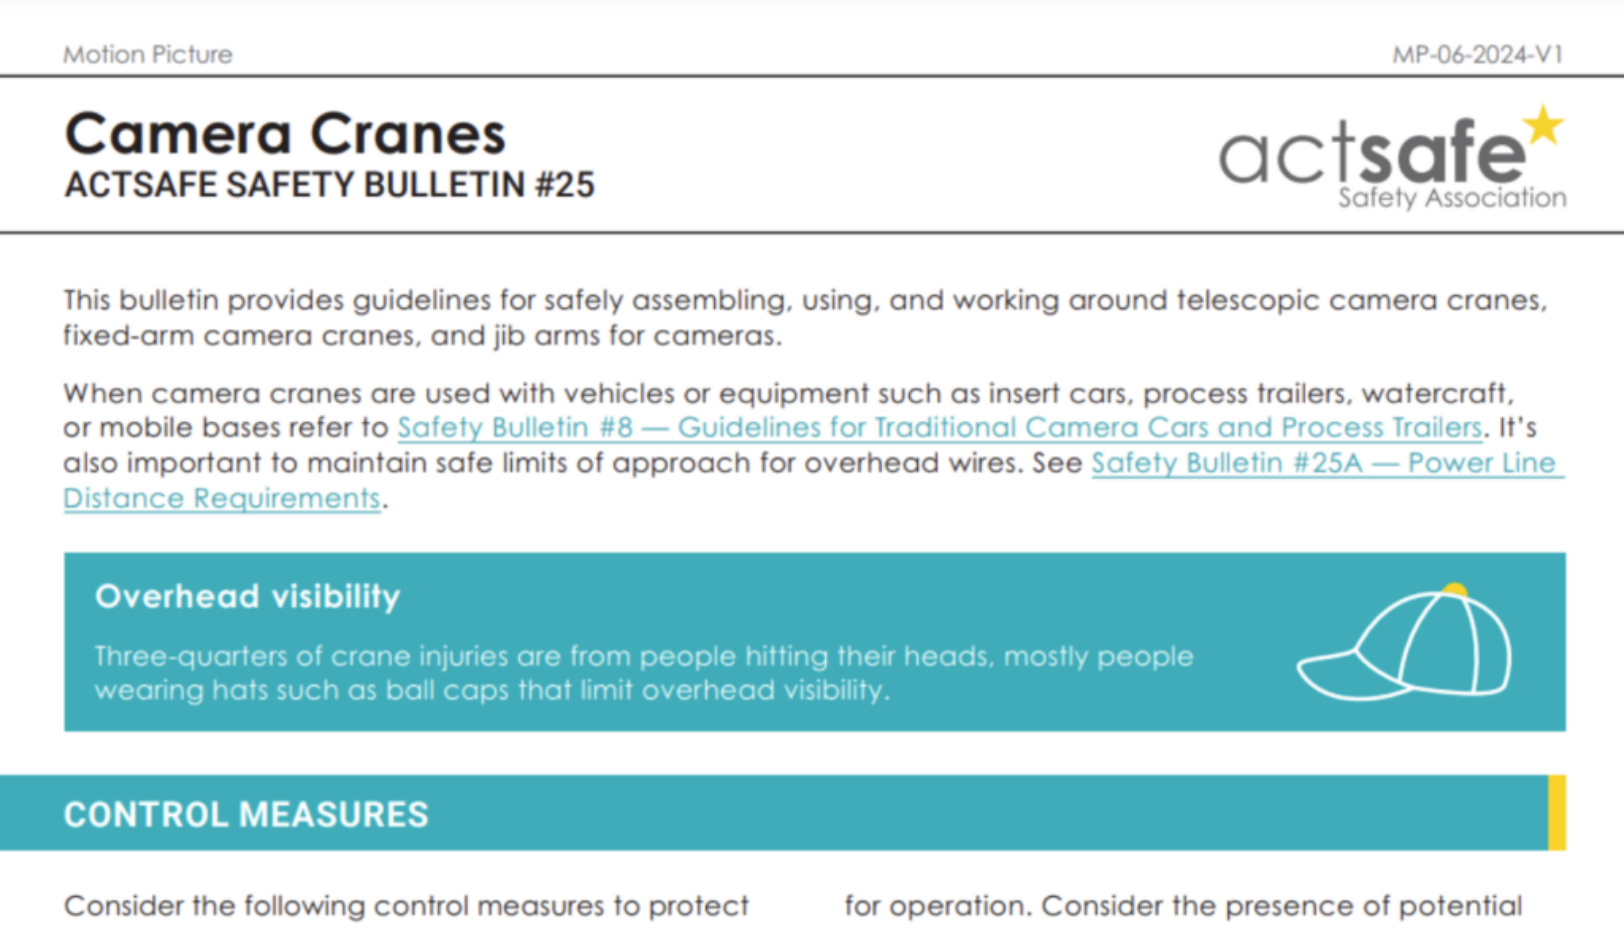 #25 Camera Cranes Safety Bulletin – Motion Picture